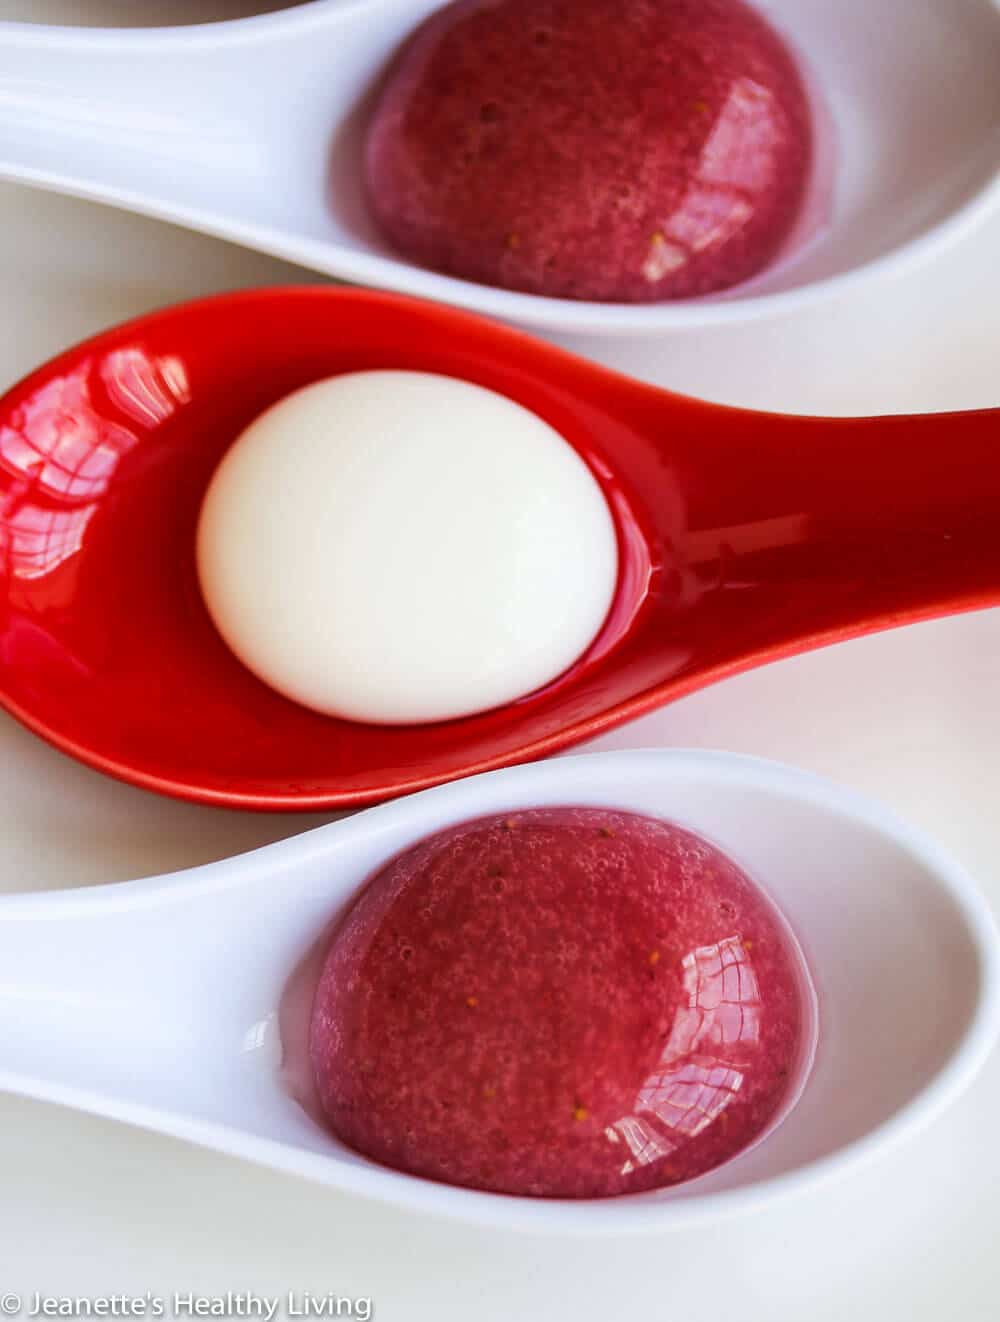 Strawberry and Yogurt Spheres - using molecular gastronomy to help people with dysphagia